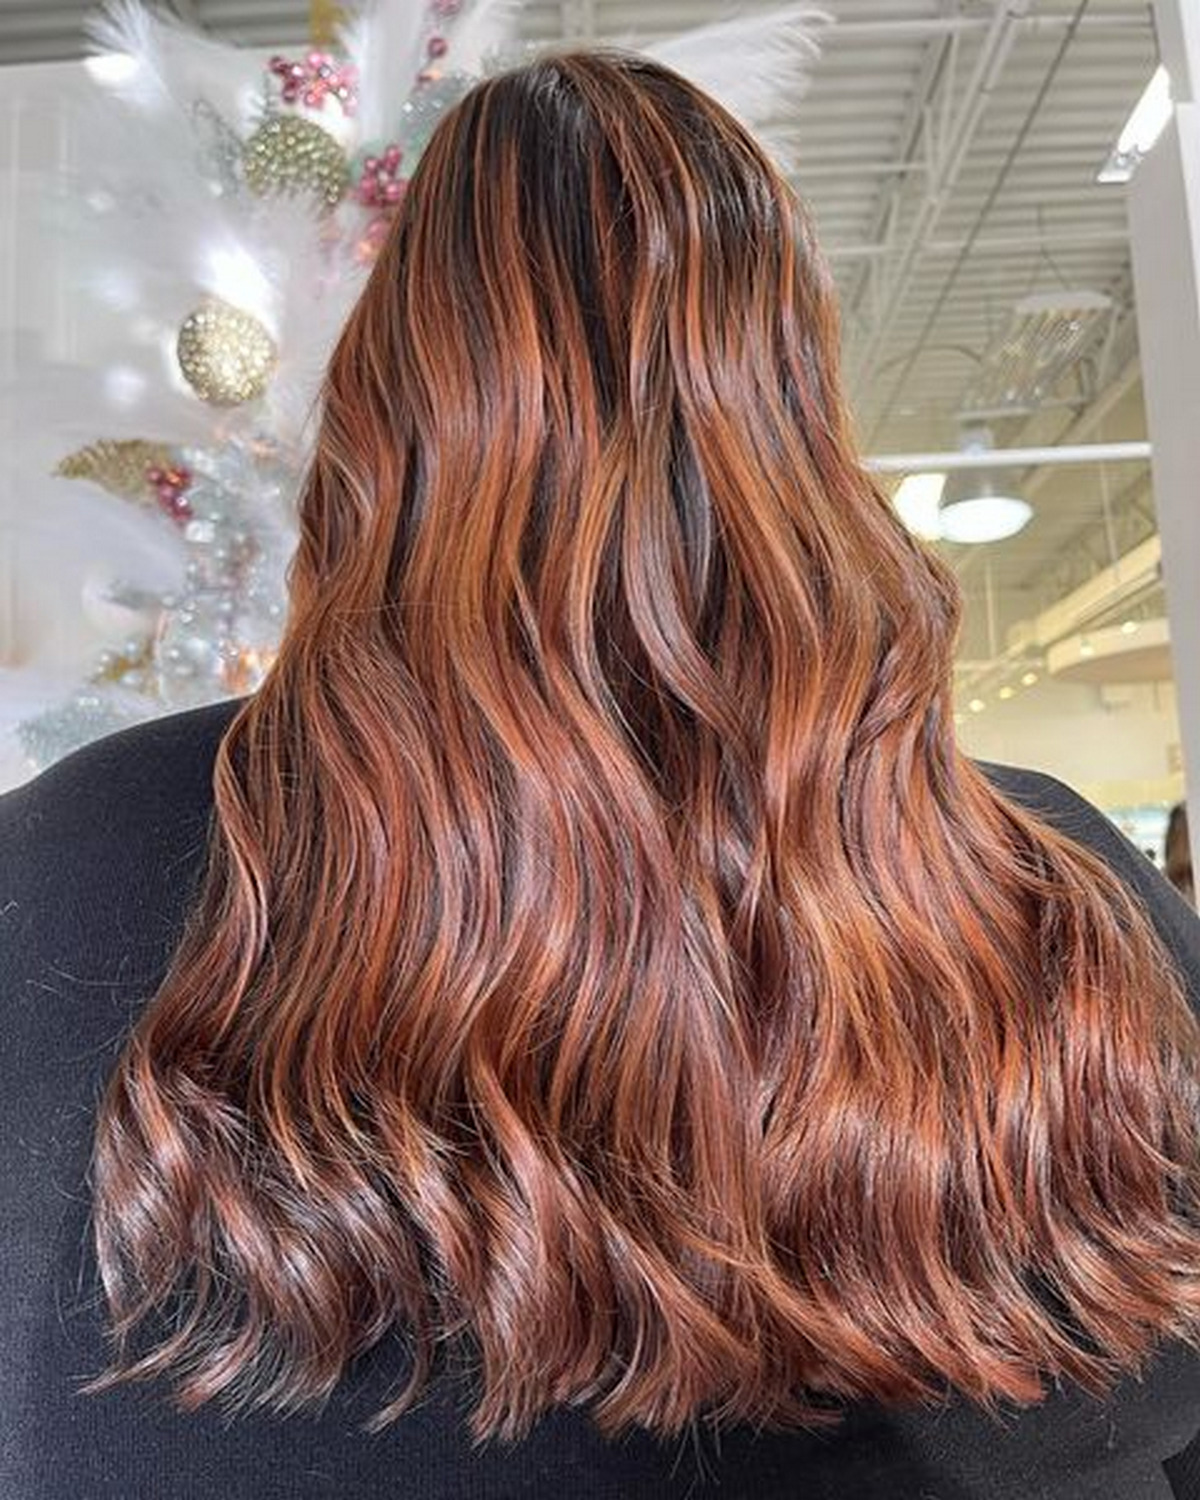 35 Beautiful Chestnut Brown Hair Ideas to Inspire 2023 - Hood MWR